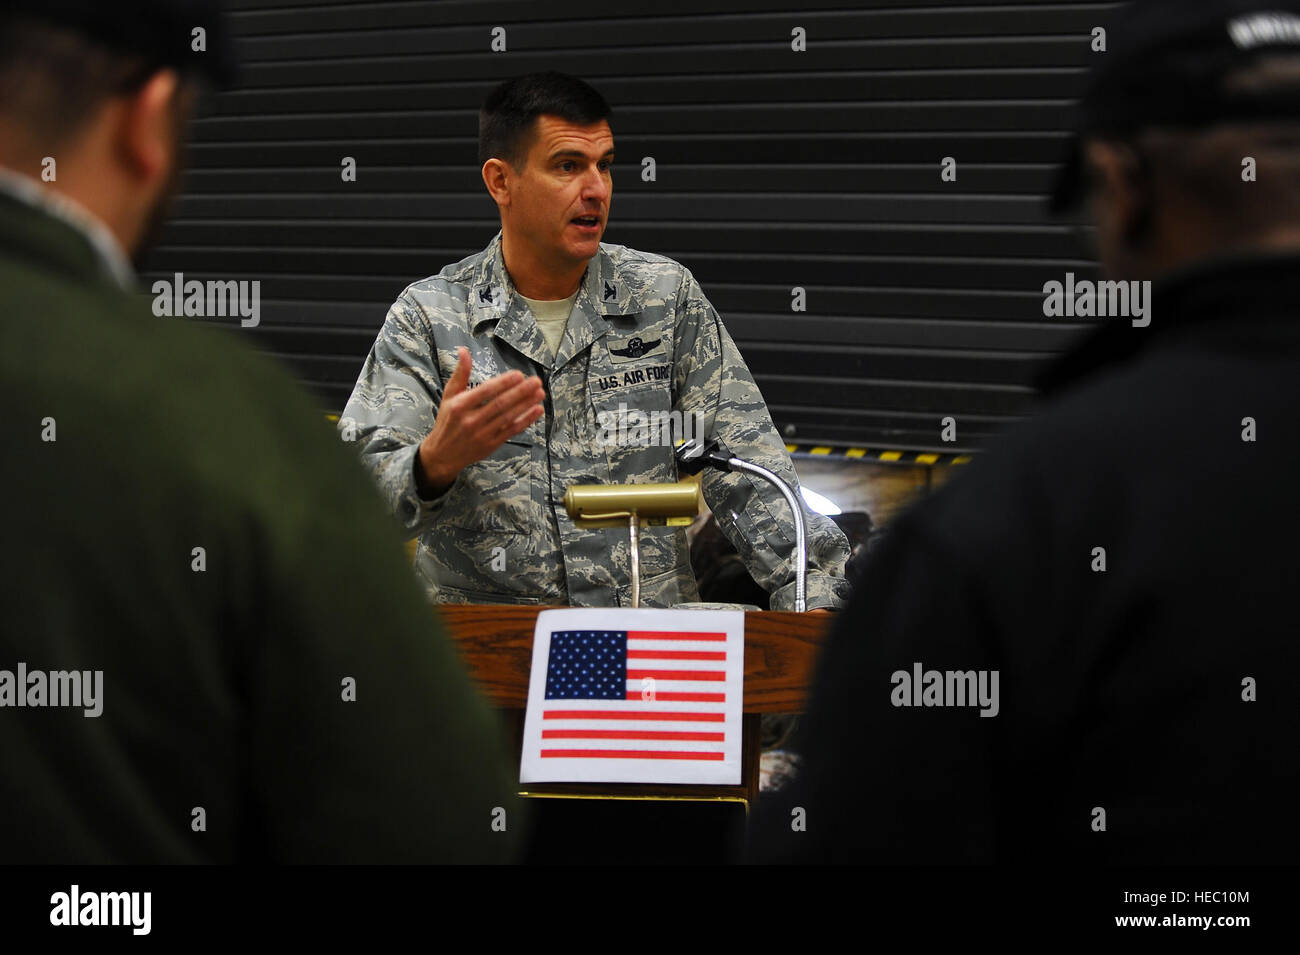 U.S. Air Force Col. Rhude Cherry III, the commander of the Joint Planning Support Element, answers questions during a mock news conference during a Joint Enabling Capabilities Command (JECC) Mission Readiness Exercise (MRX) at Shaw Air Force Base, S.C., March 13, 2014. The JECC conducted the MRX to practice for real world events, which helps them fulfill their mission of providing mission-tailored, joint capability packages to Combatant Commanders in order to facilitate rapid establishments of Joint Forces Headquarters, as well as Global Response Force execution and bridge joint operational re Stock Photo